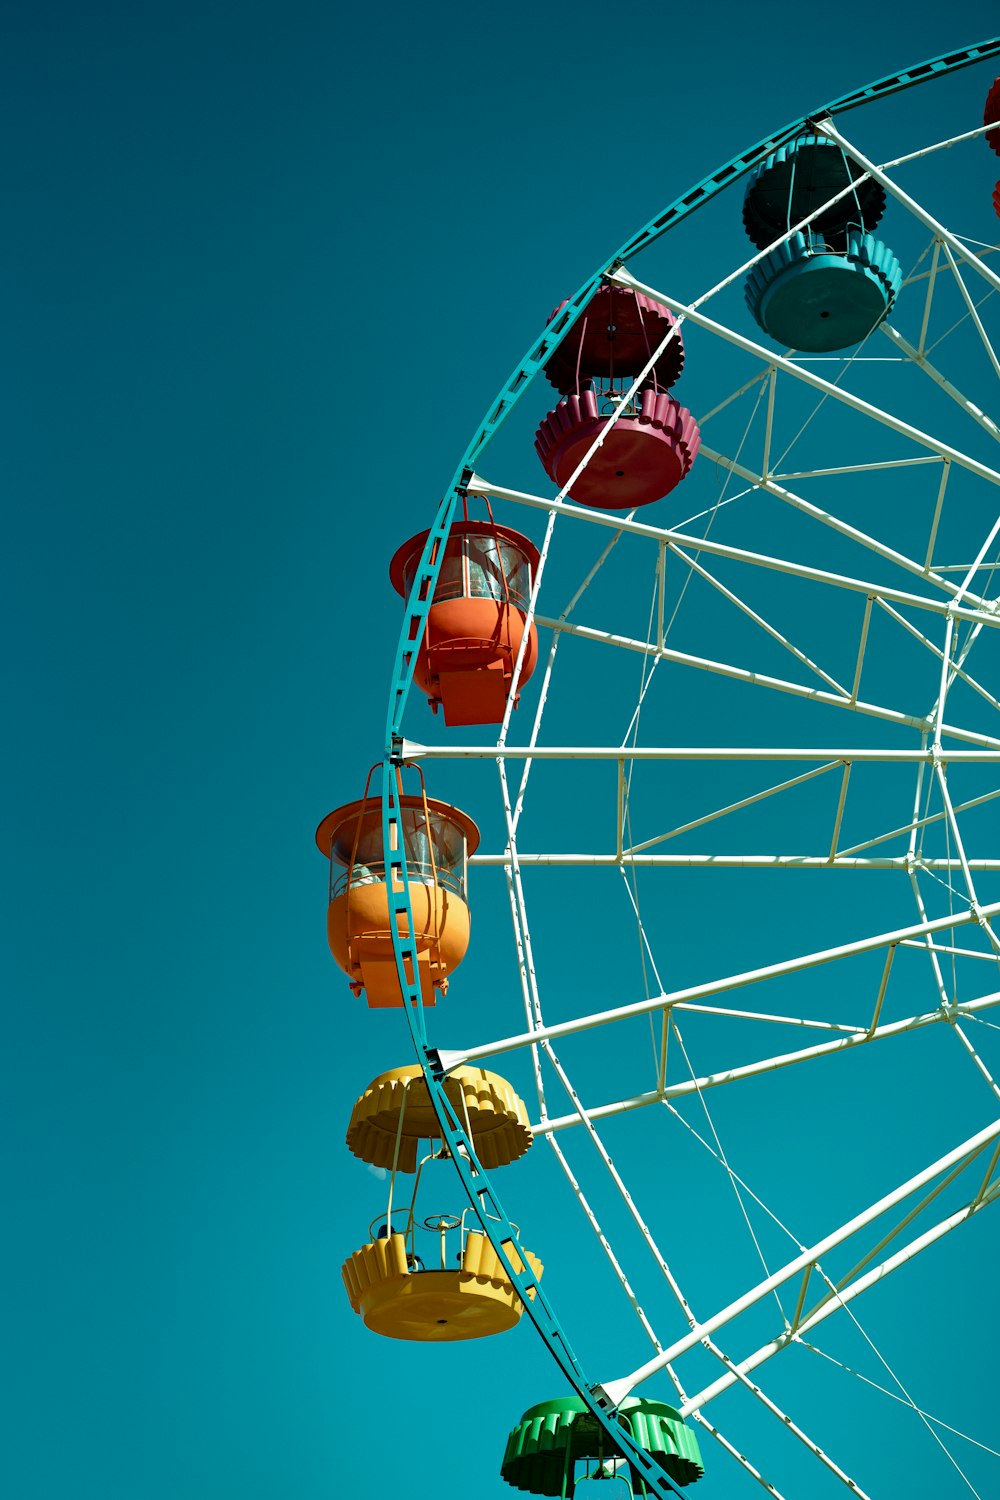 a large ferris wheel with colorful decorations hanging from it's sides